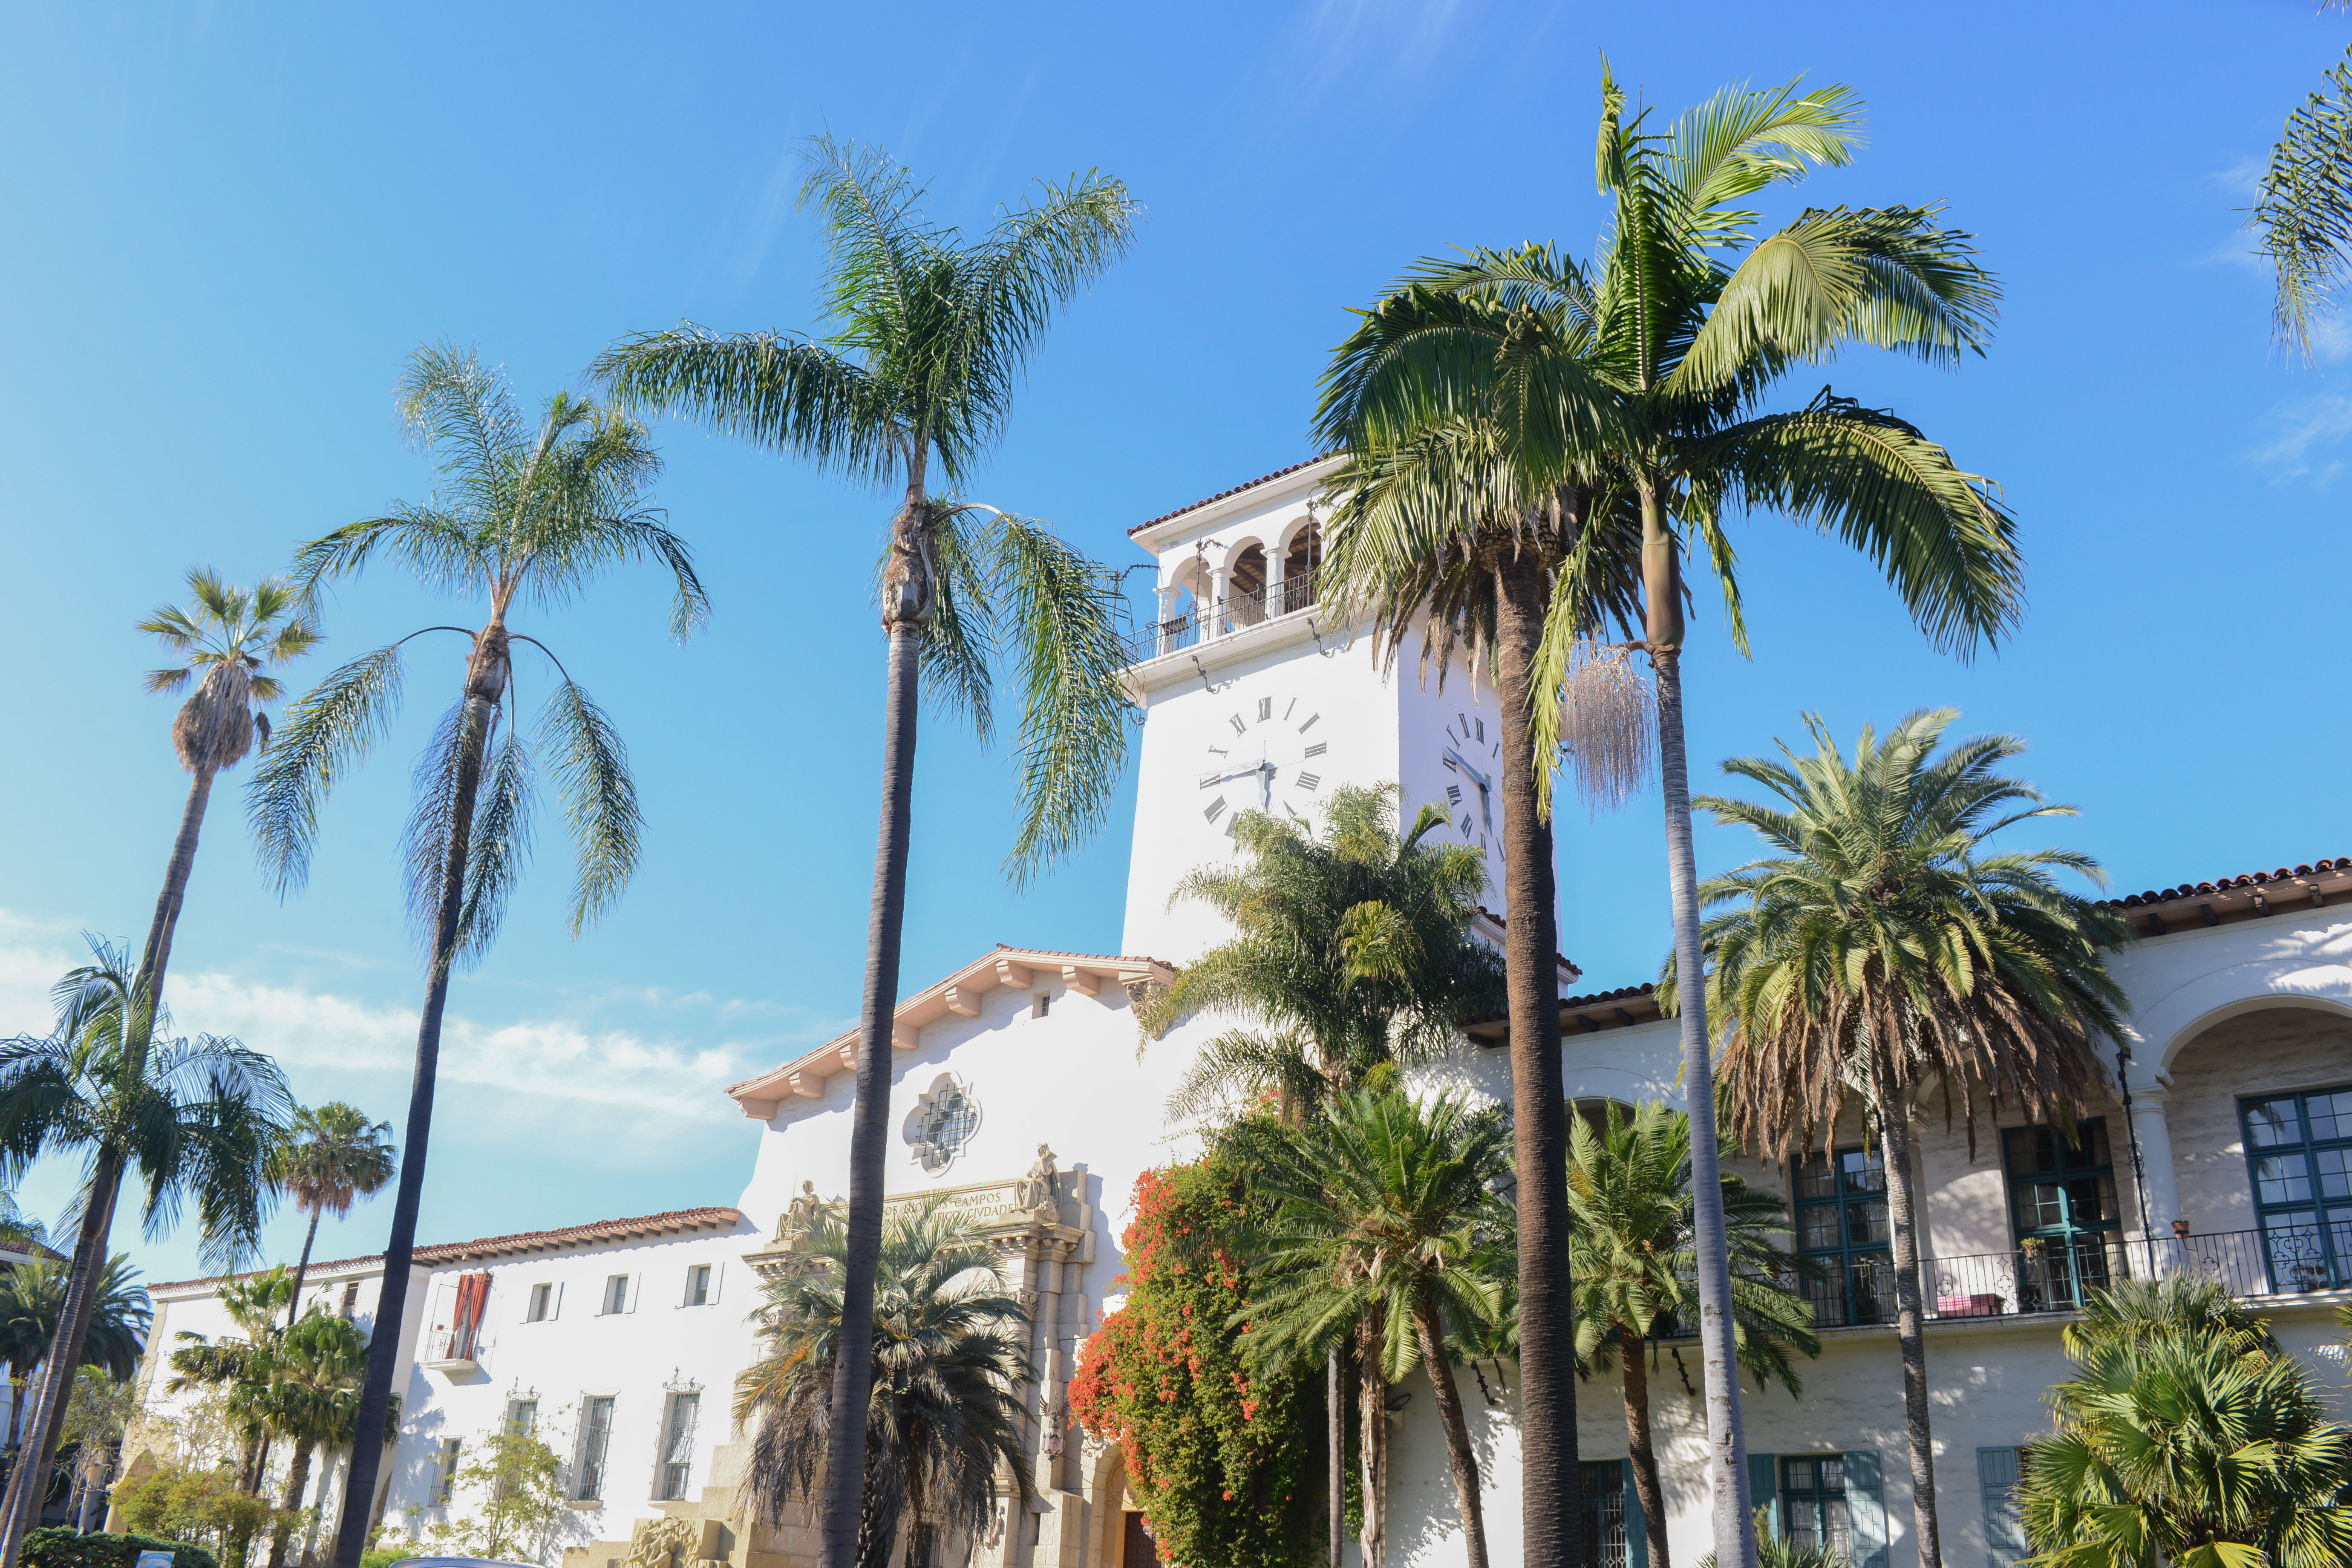 white spanish style courthouse behind a row of palm trees